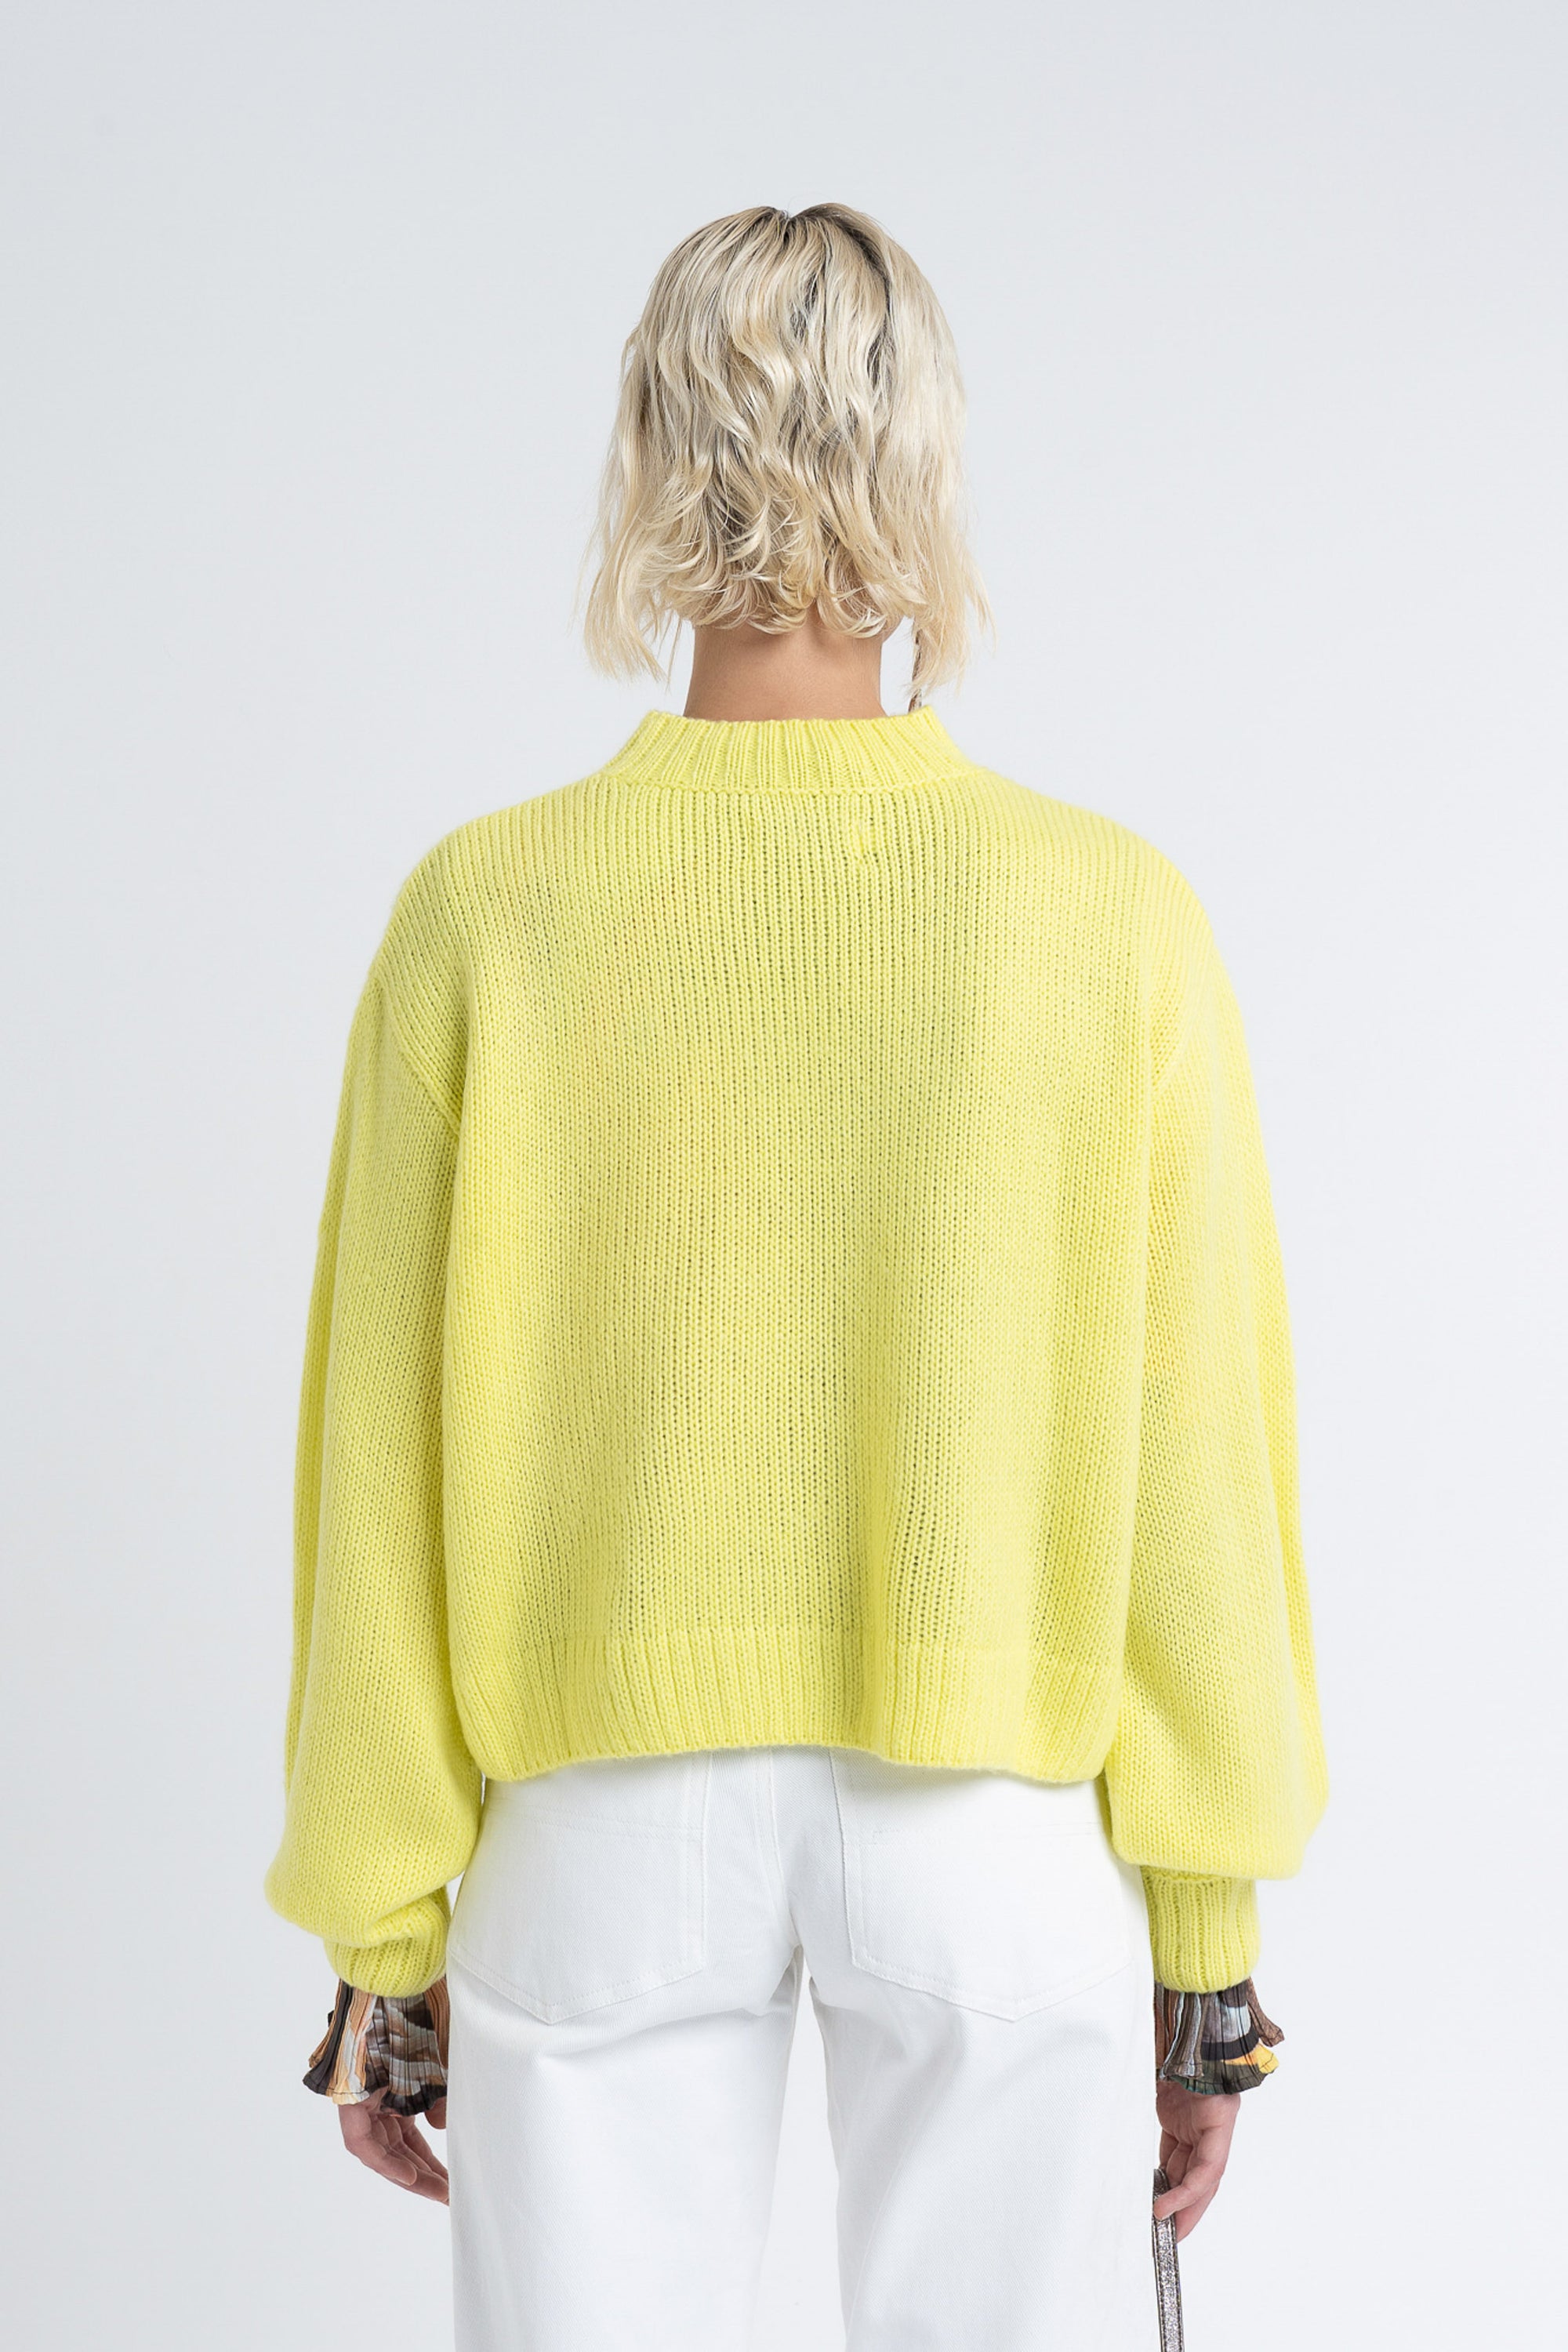 Arthur Apparel Lemon Sublime Cropped Oversized Sweater with Dropped Shoulder in Acrylic Jersey Knit